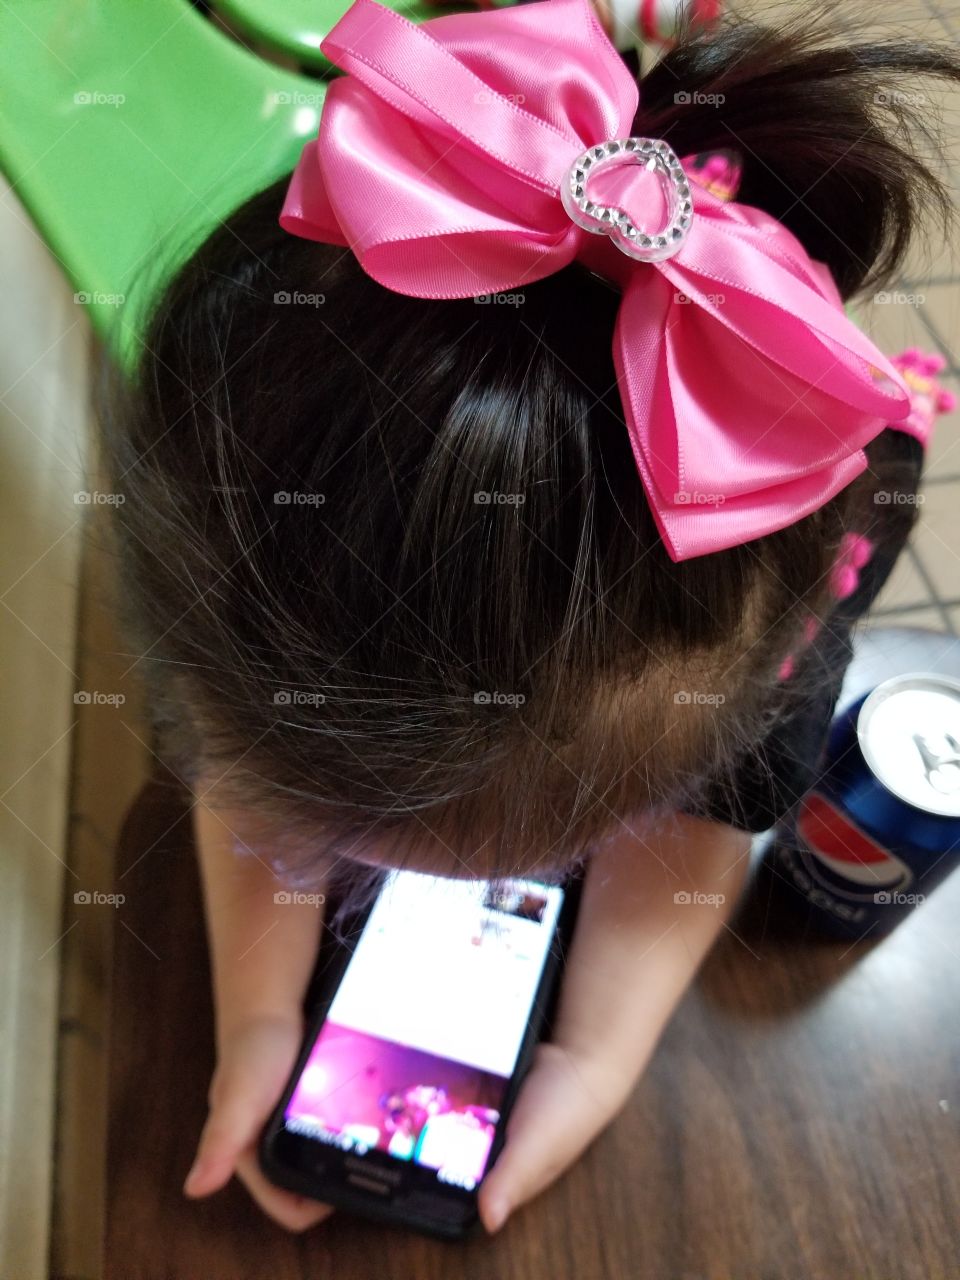 When You Are A Princess But Cannot Give Up YouTube or Pepsi